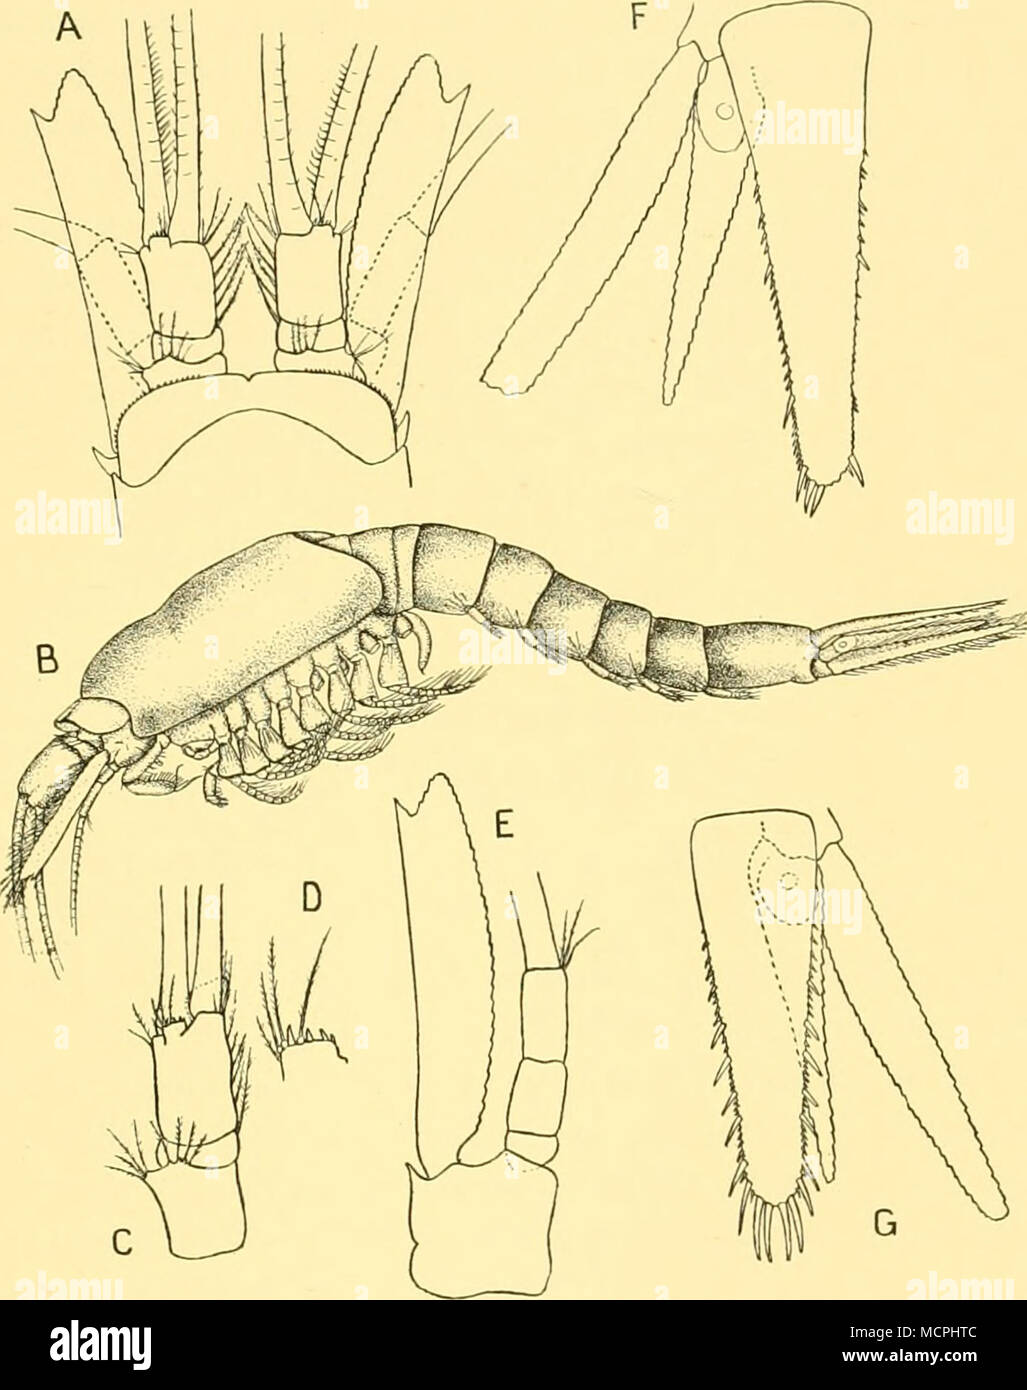 . Fig. 18. Pseudomma longicaudum sp.n. A, anterior end of female in dorsal view, x 13; B, immature male in lateral view, x 7; C, antennular peduncle of immature male, x 16; D, process from distal dorsal margin of third segment of antennular peduncle; E, left antenna of immature male, x 16; F, telson and left uropod of adult female, x 13; G, telson and right uropod of imma- ture male, x 18. it is not possible to tell their length. In the juvenile specimen, the endopod extends almost to the apex of the telson and the exopod extends to the tips of the apical spines, so that probably either the te Stock Photo